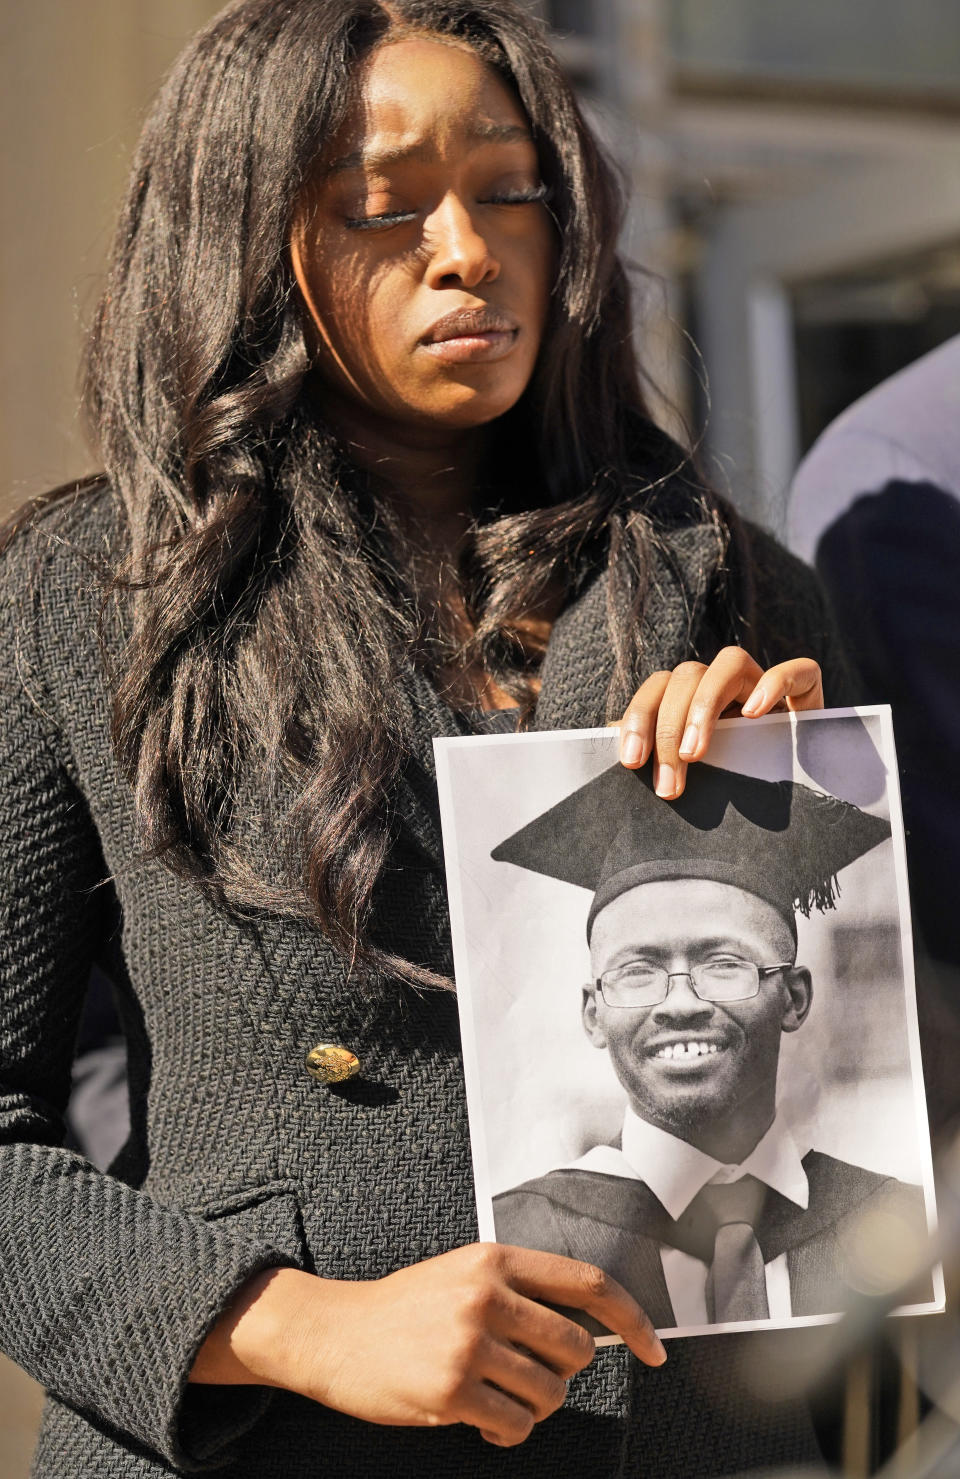 Zipporah Kuria, of London, holds a photo of her deceased father Joseph Waithaka, as she stands outside federal court after the Boeing arraignment hearing in Fort Worth, Texas, Thursday, Jan. 26, 2023. Waithaka was killed in 2019 crash of a Boeing 737 Max airliner. (AP Photo/LM Otero)